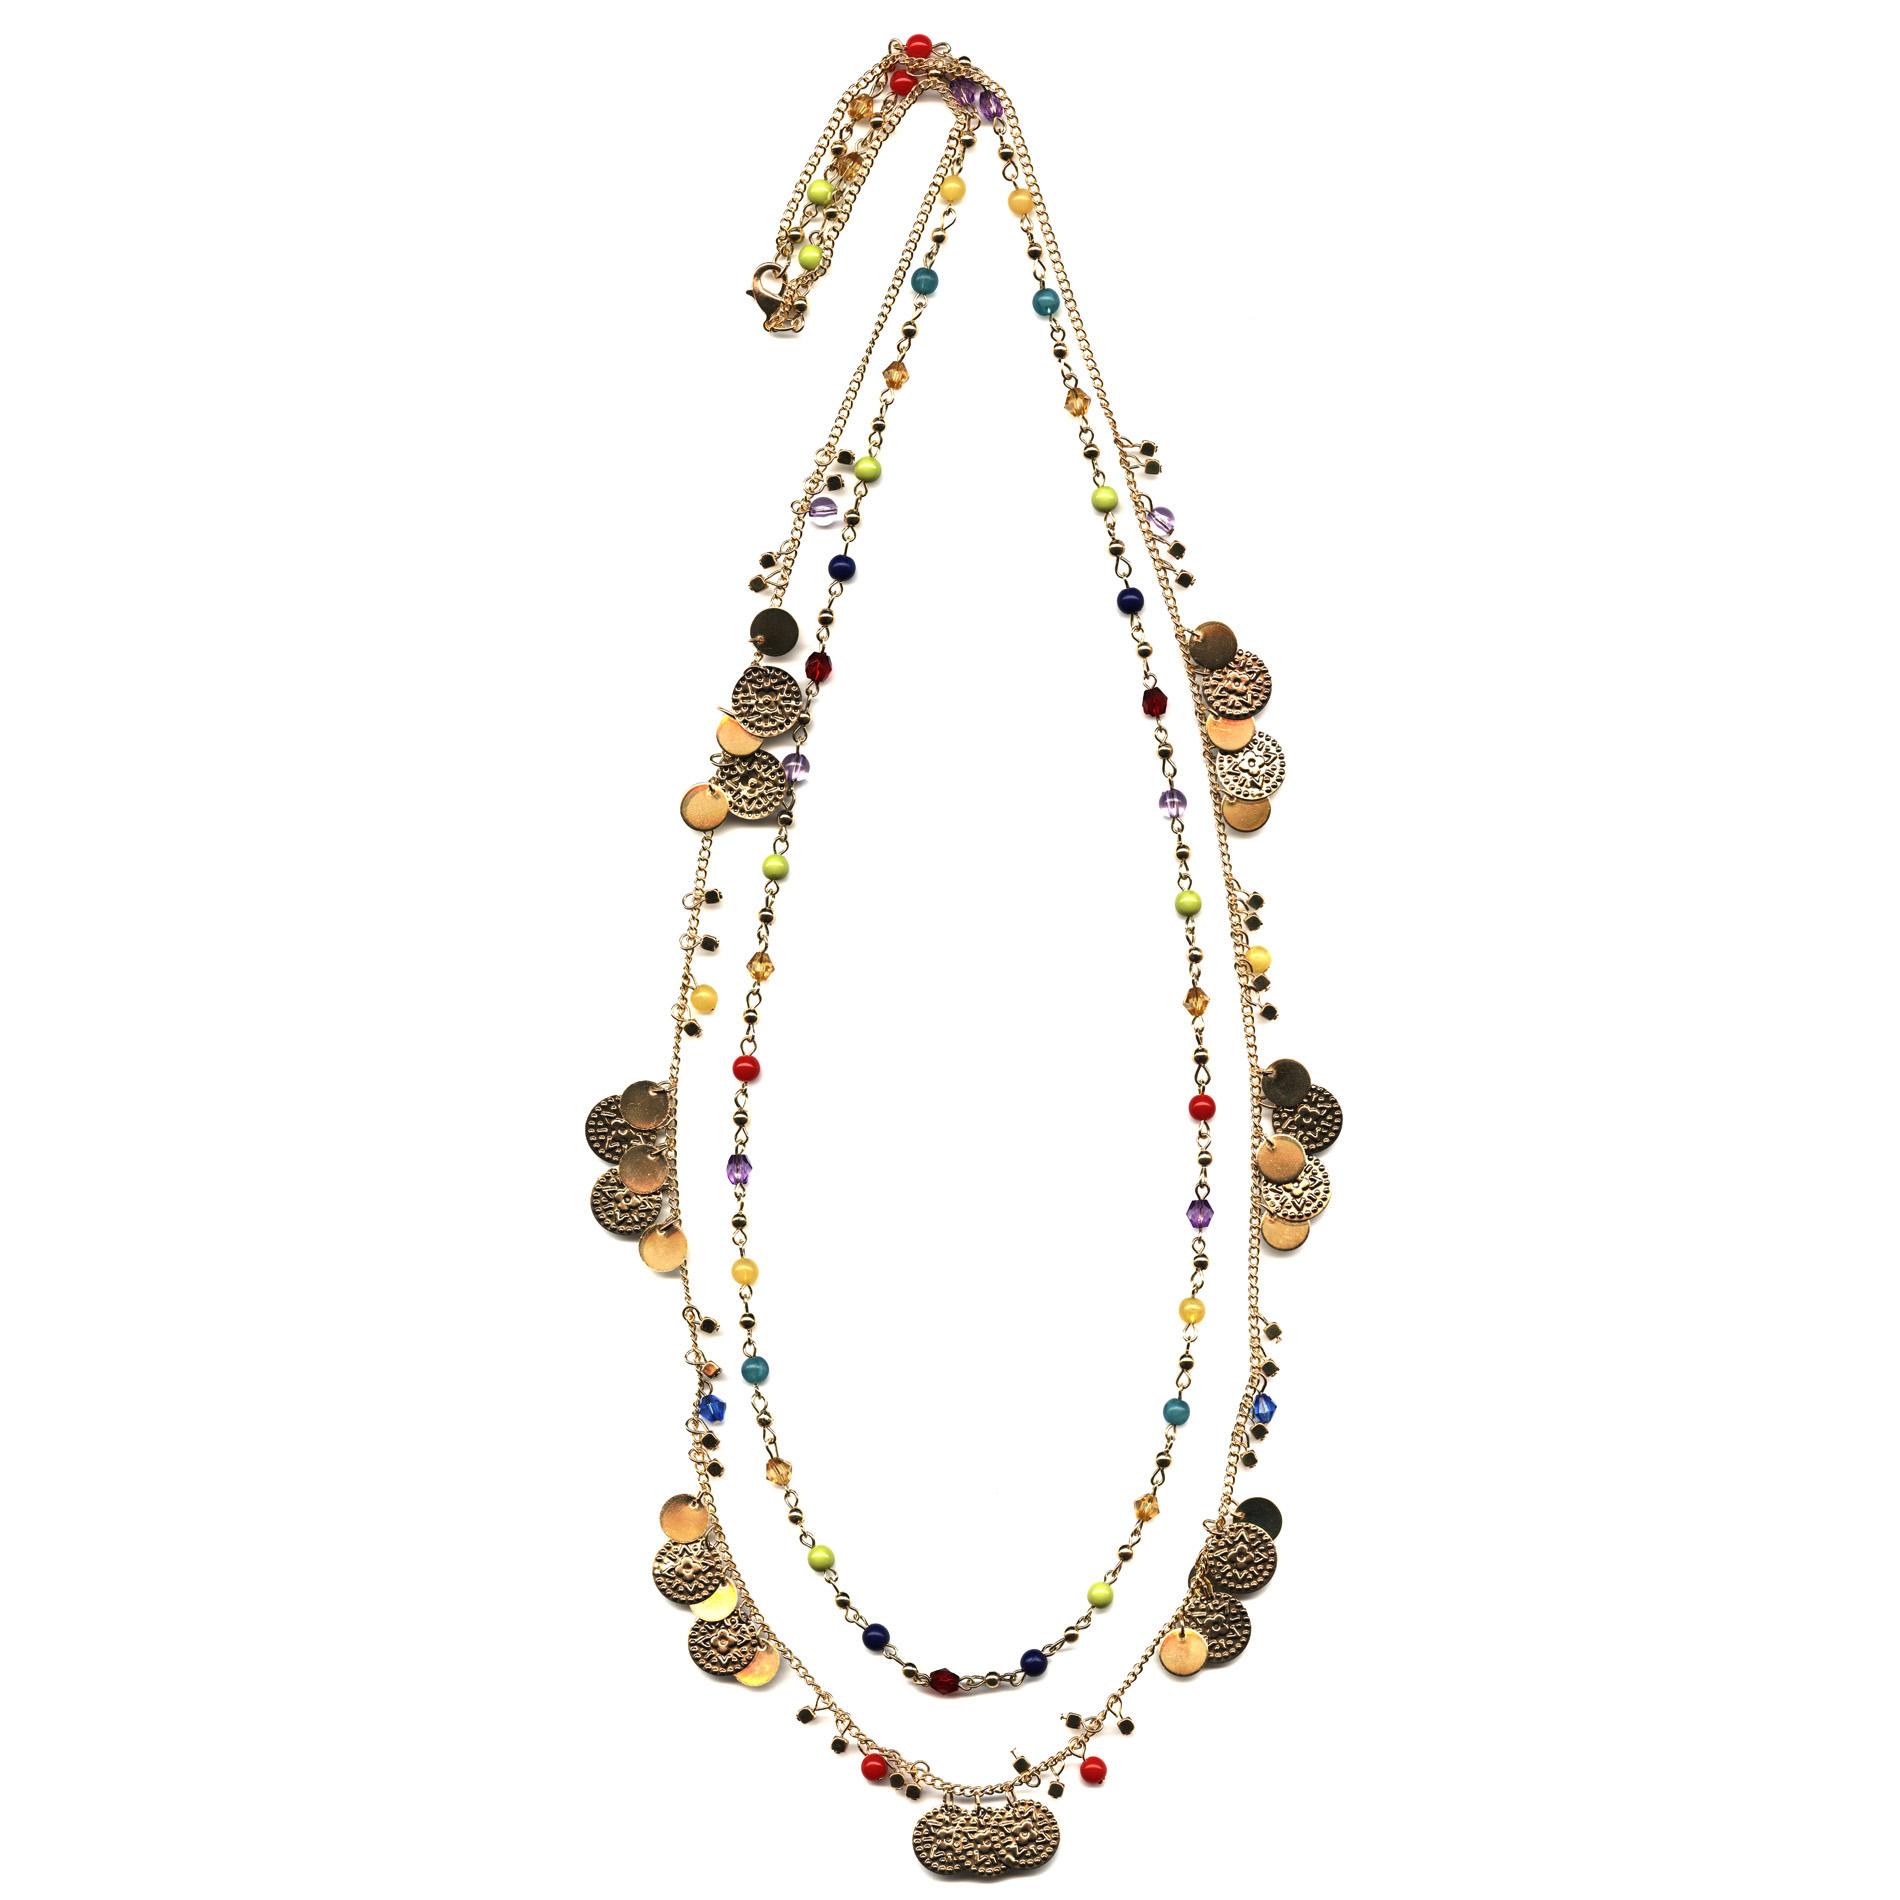 Jaclyn Smith Women's Double-Strand Bead & Charm Necklace - Discs